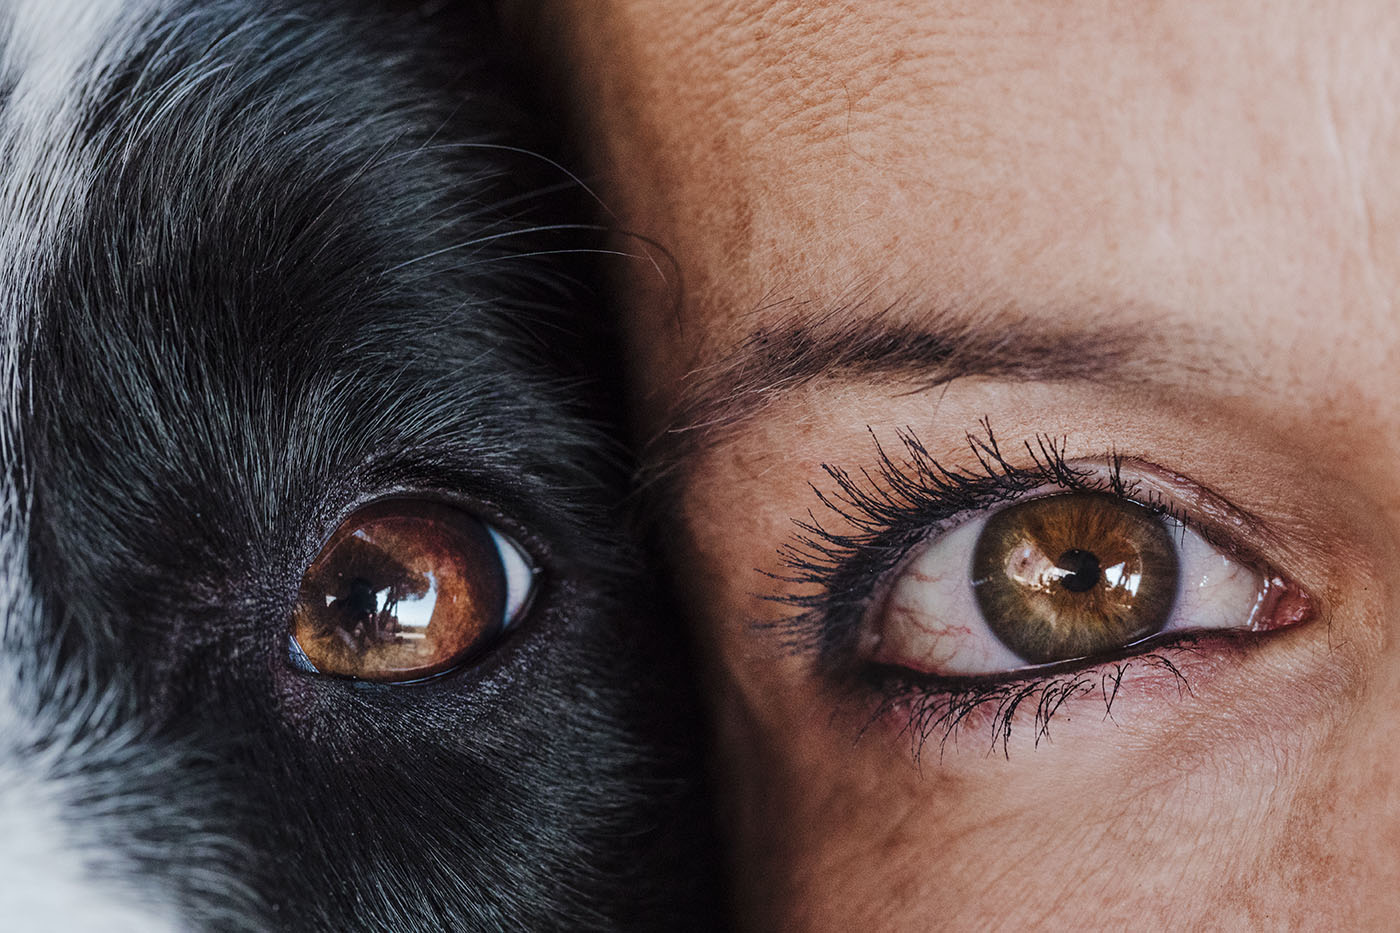 Dogs and human eyes